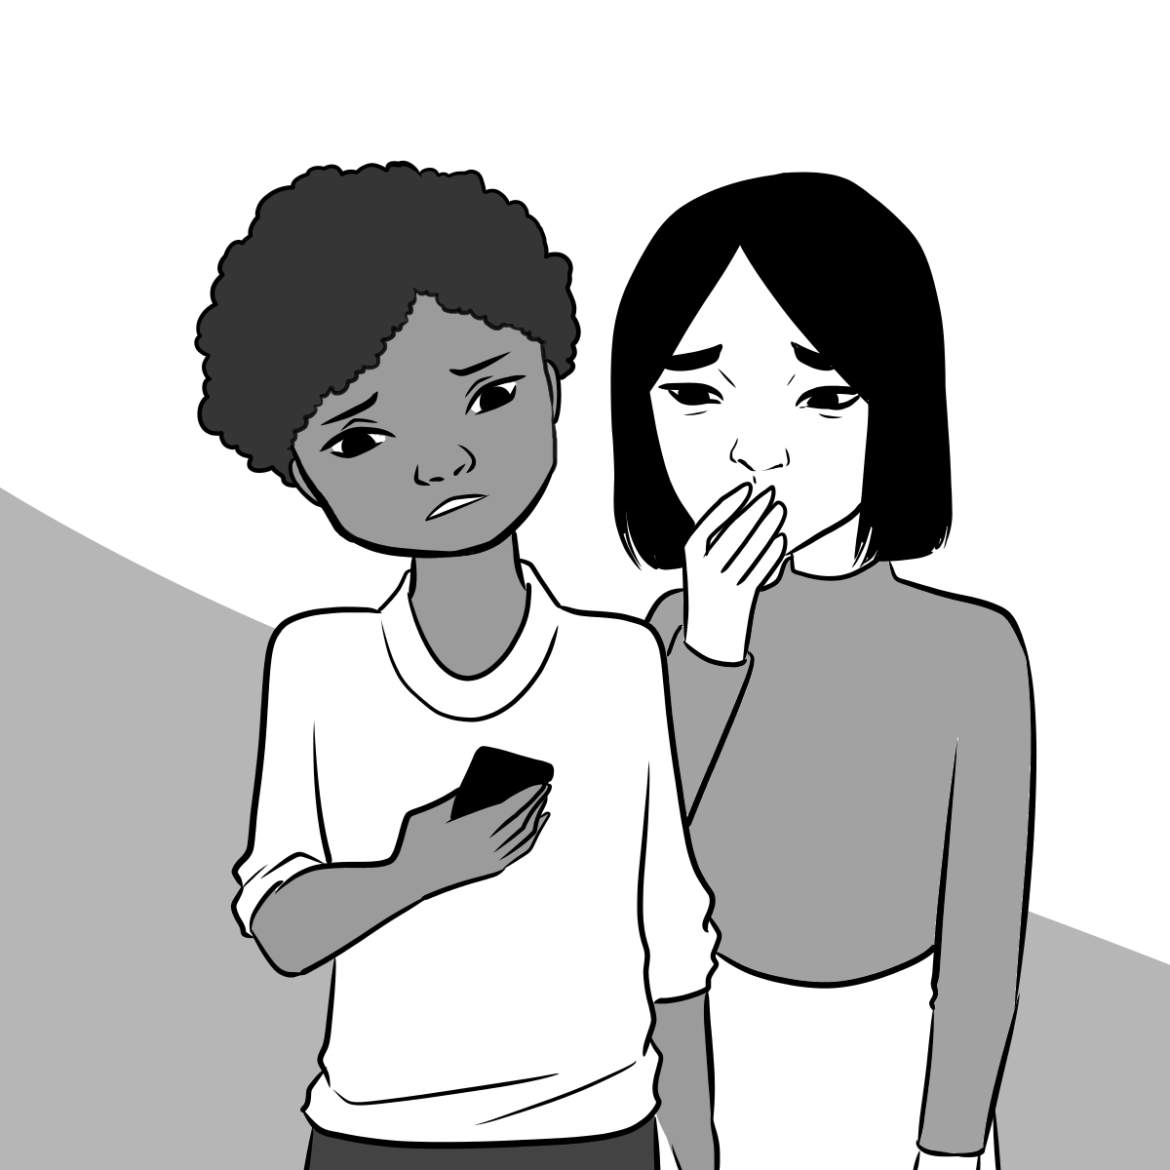 Aanimated drawing of two girls with worried faces looking a electrial device.